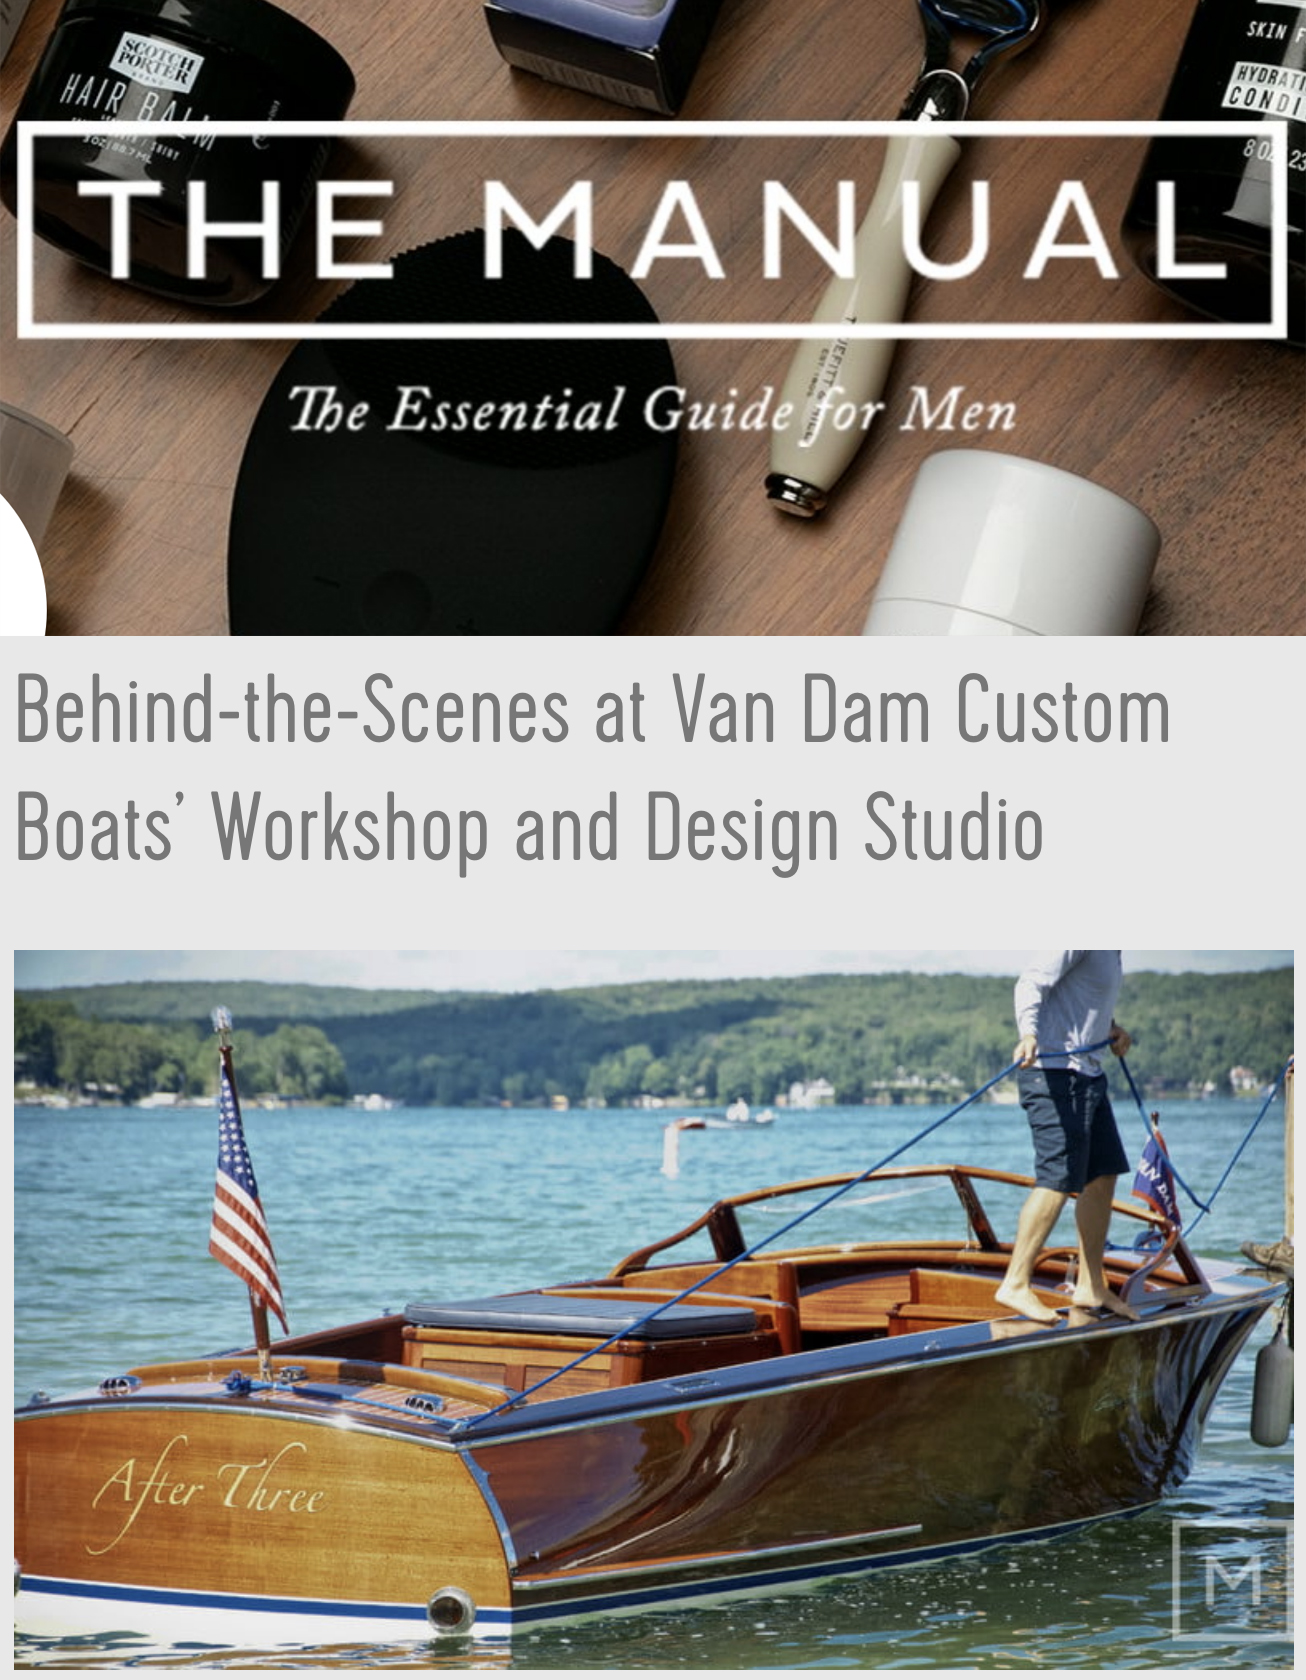 Cover of The Manual magazine.